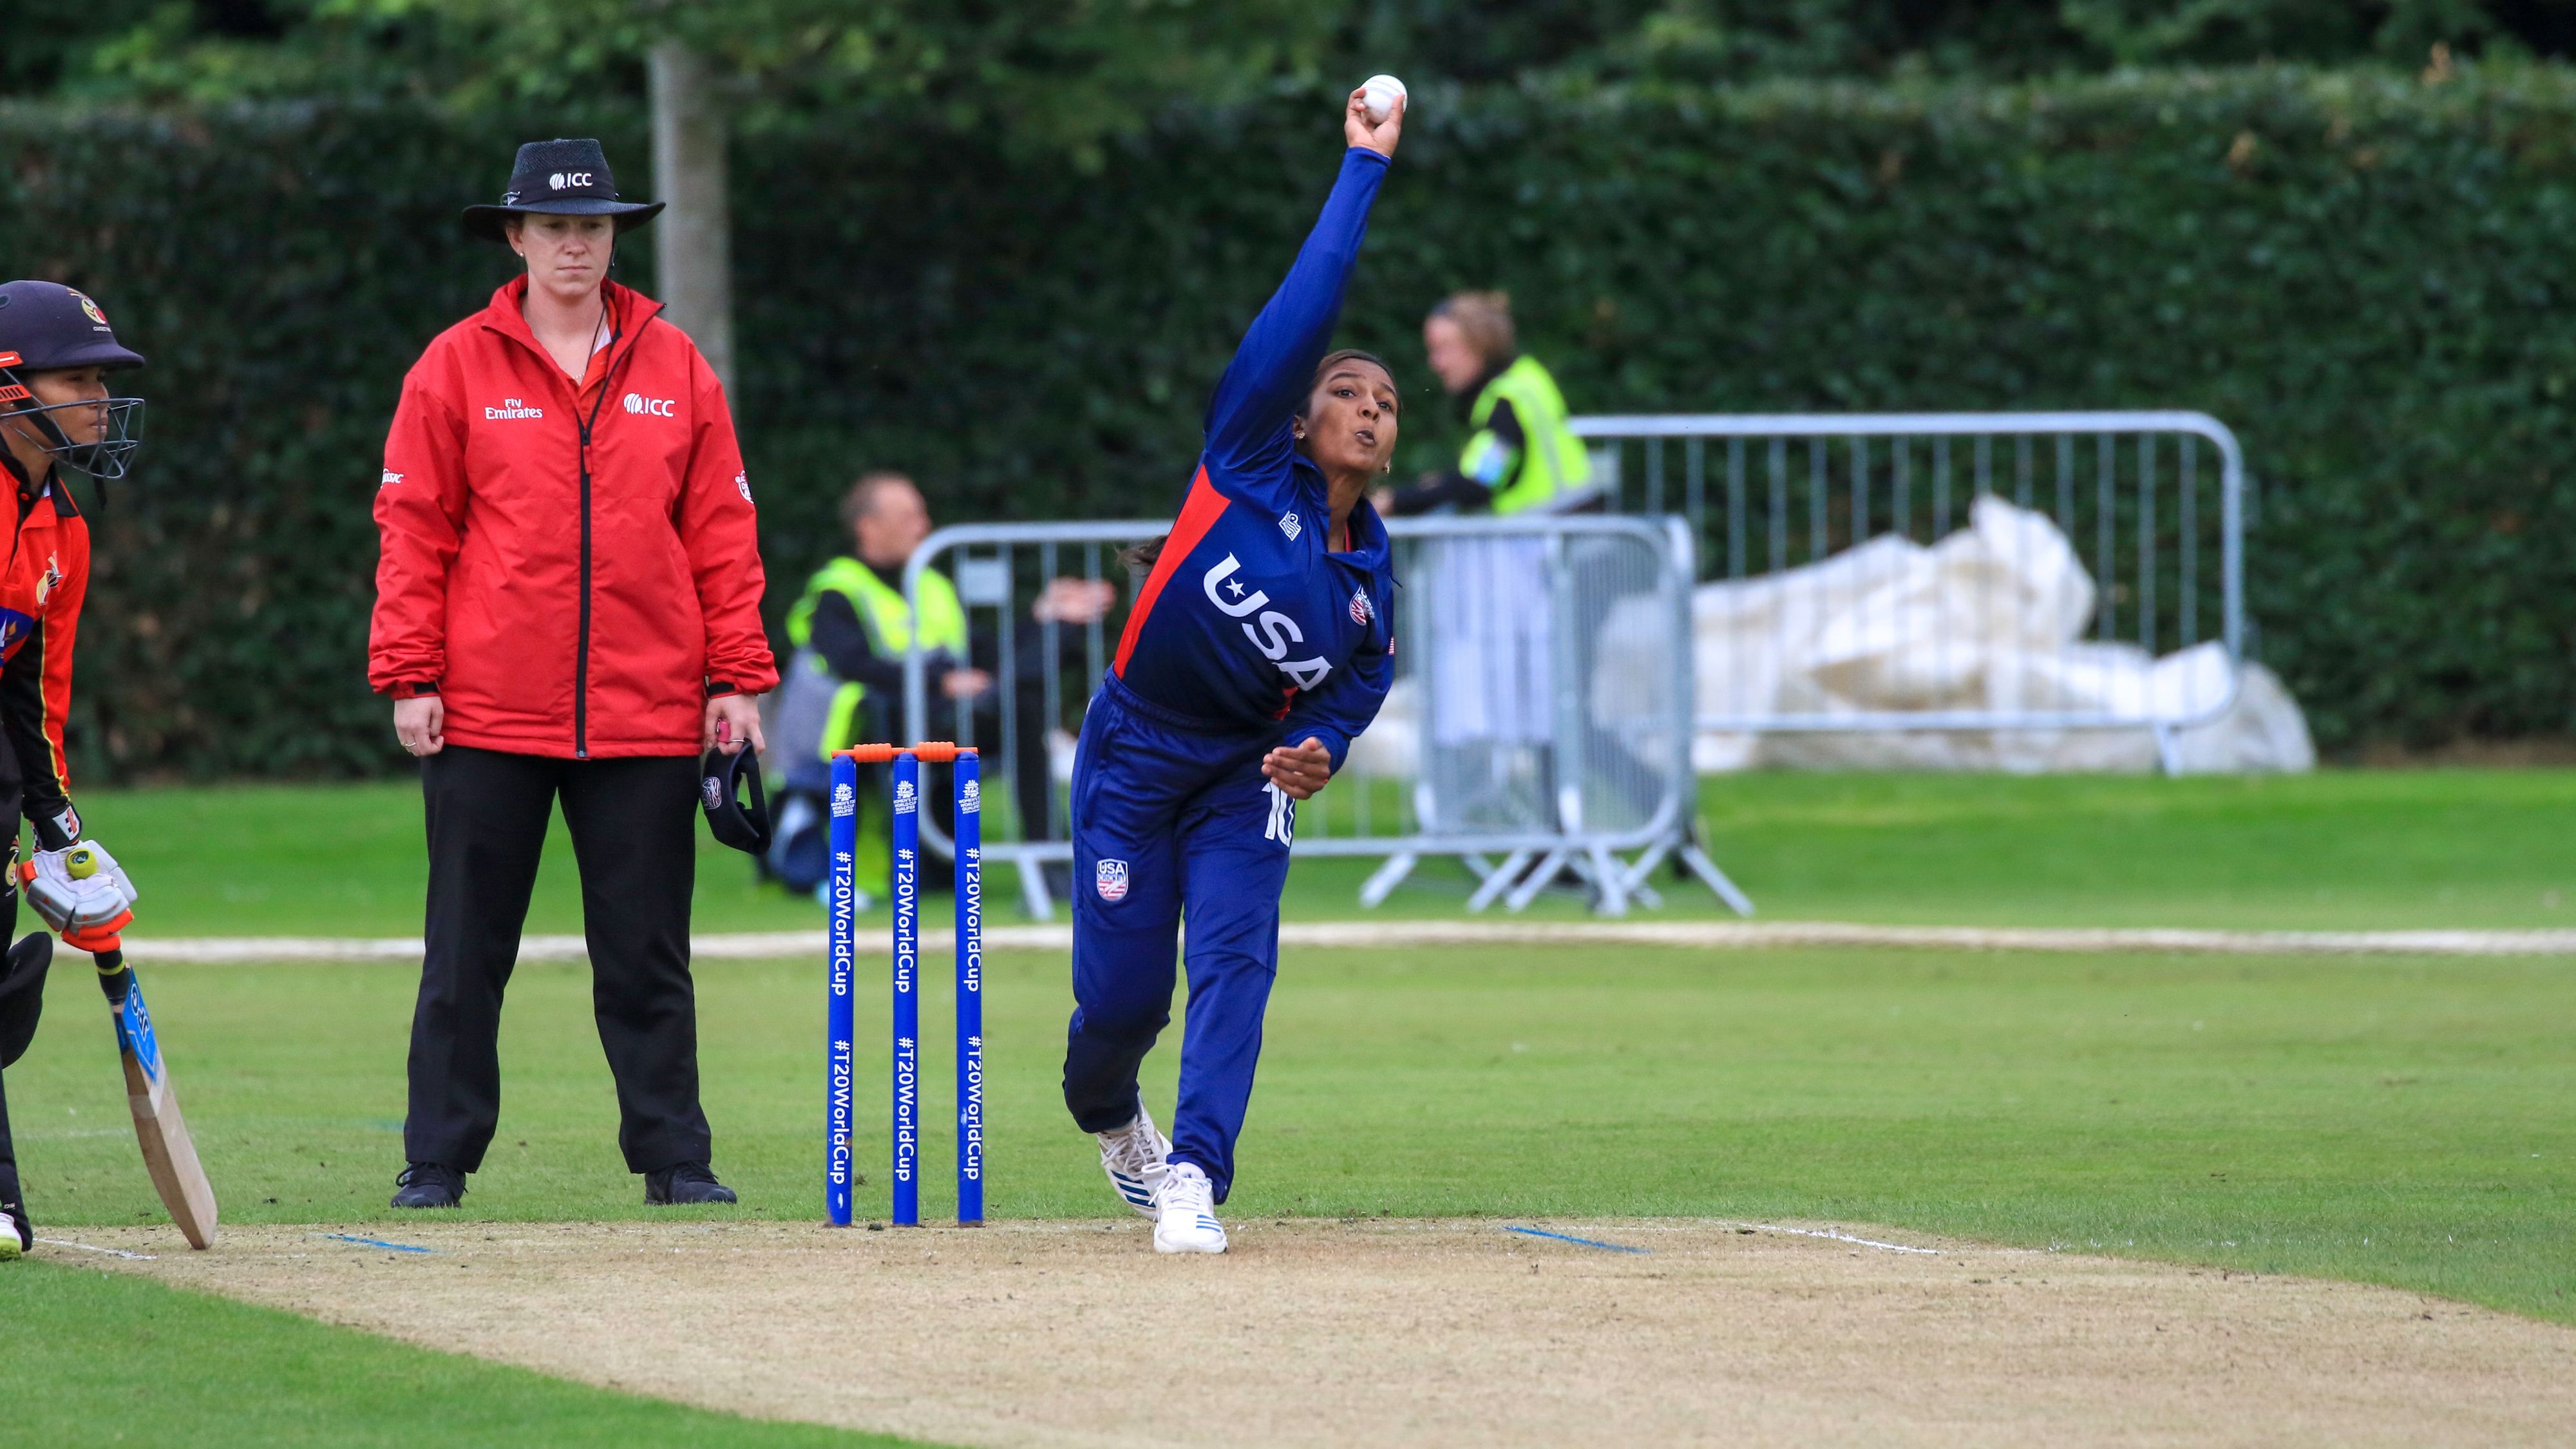 USA Cricket Announces Upcoming Talent Identification Events for Women and Girls